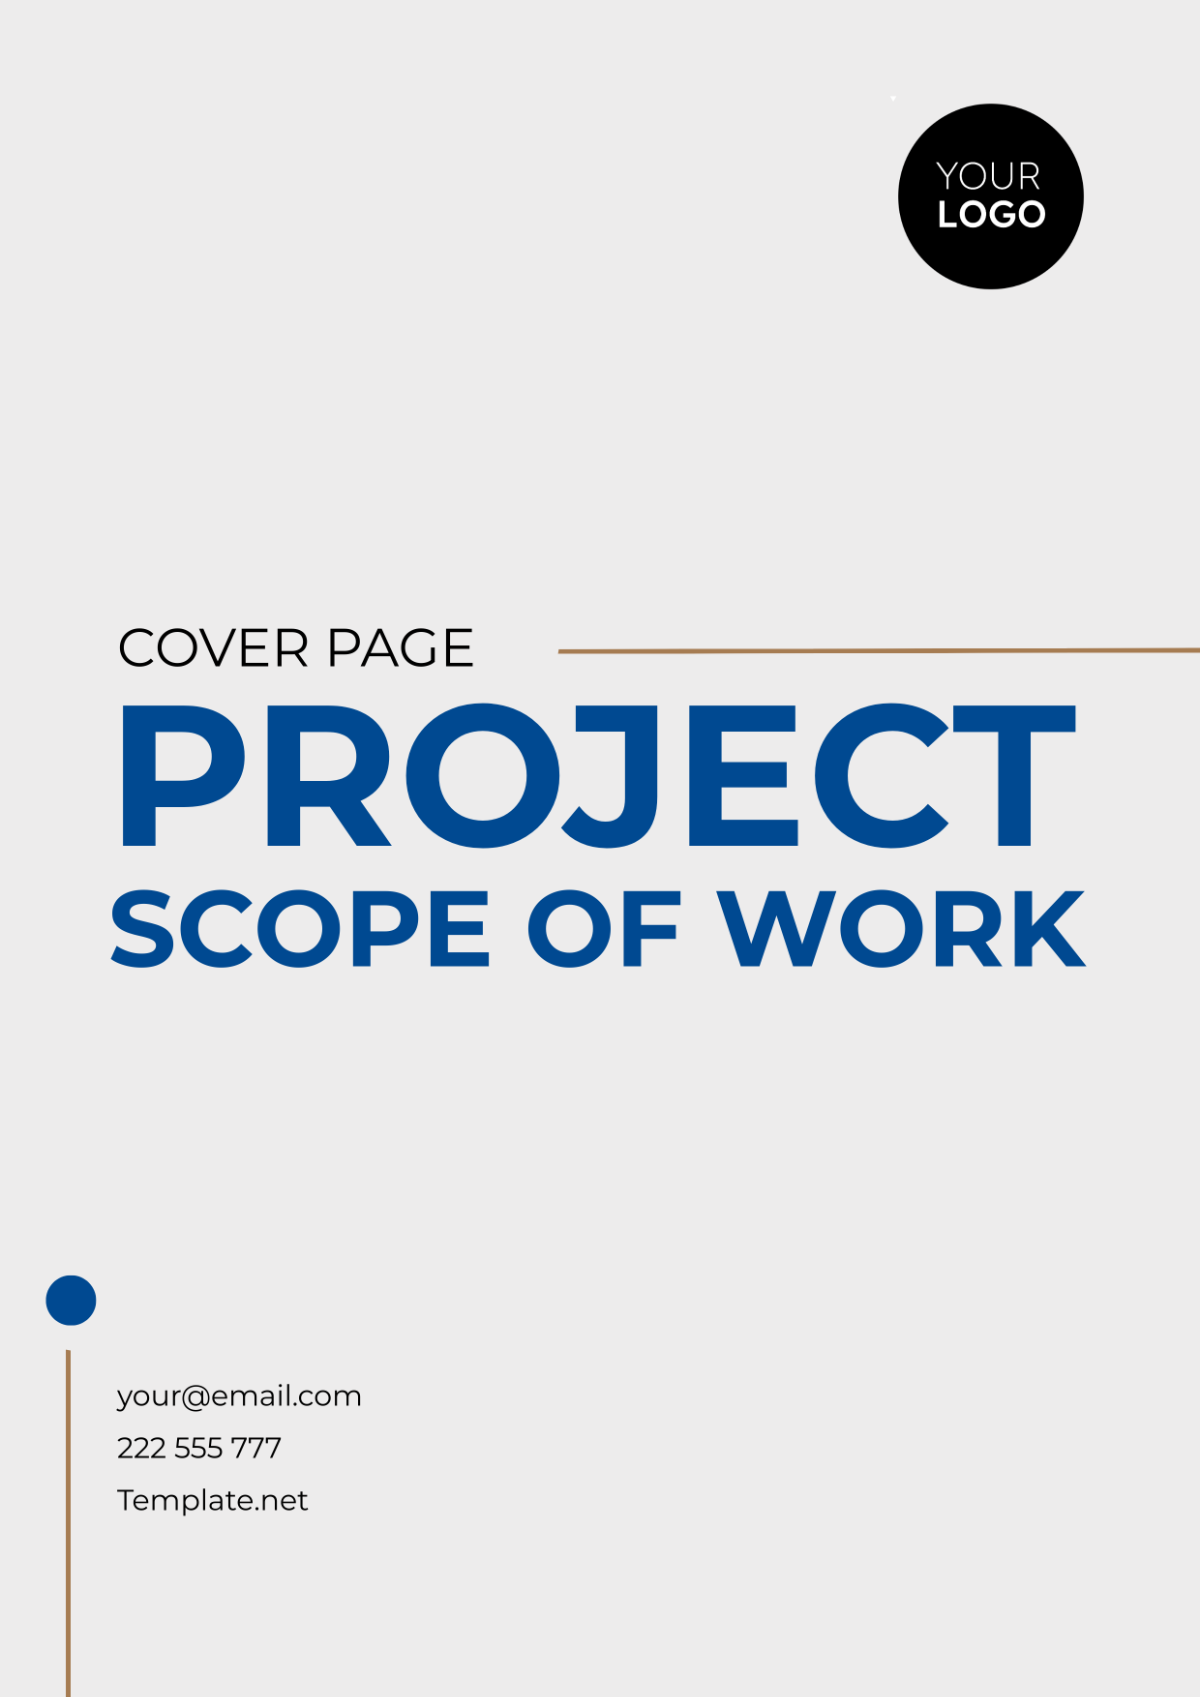 Project Scope of Work Cover Page